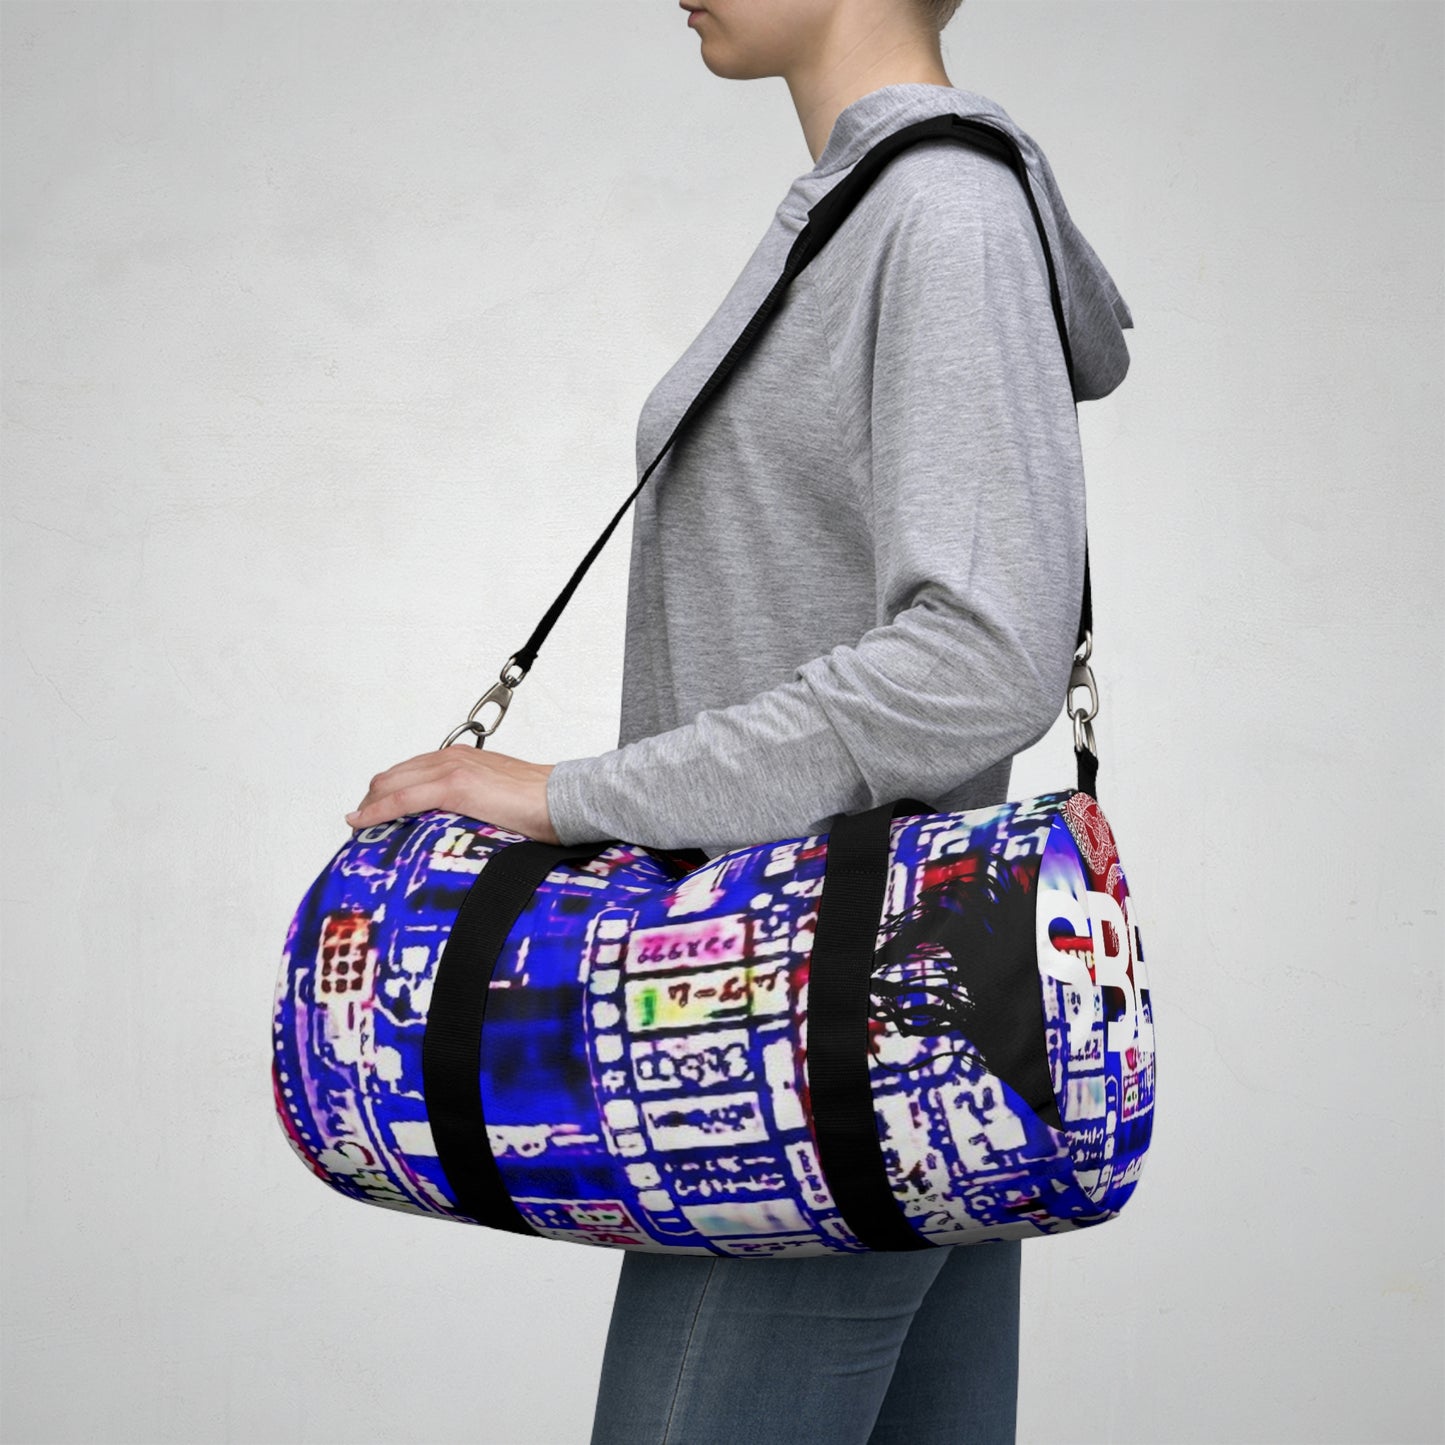 Tokyo Japanese Abstract Duffle Bag, Weekender Bag, Carry on Travel Overnight Canvas